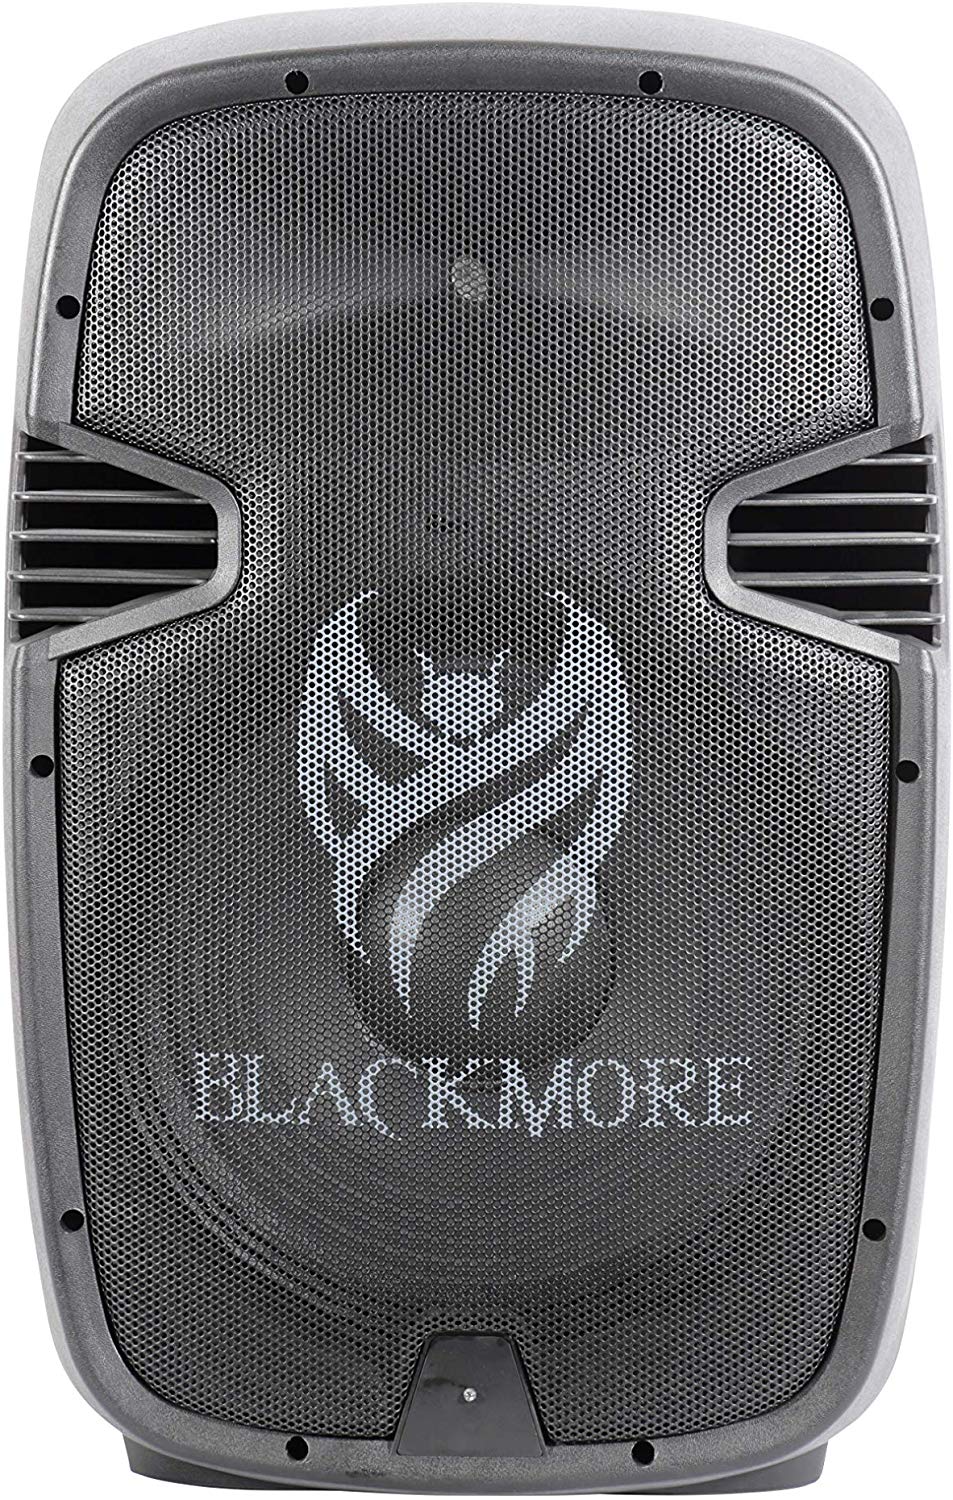 Blackmore Amplified Professional PA System W/Dual 15-Inch Monitors